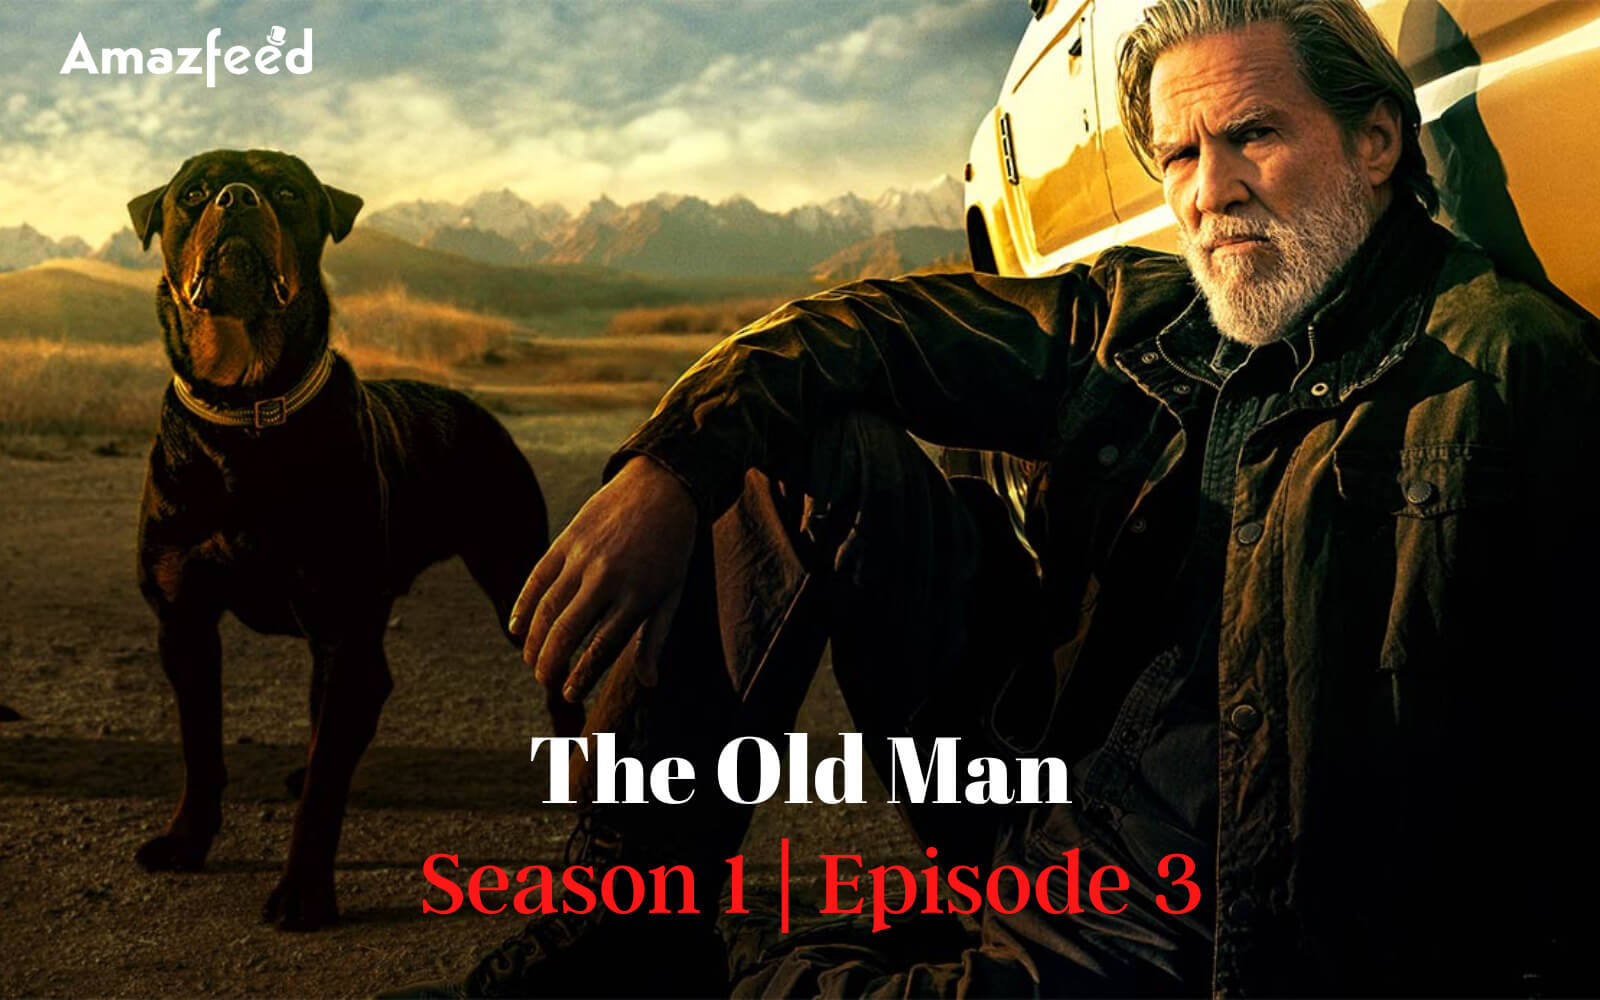 The Old Man Season 1 Episode 3 Release date